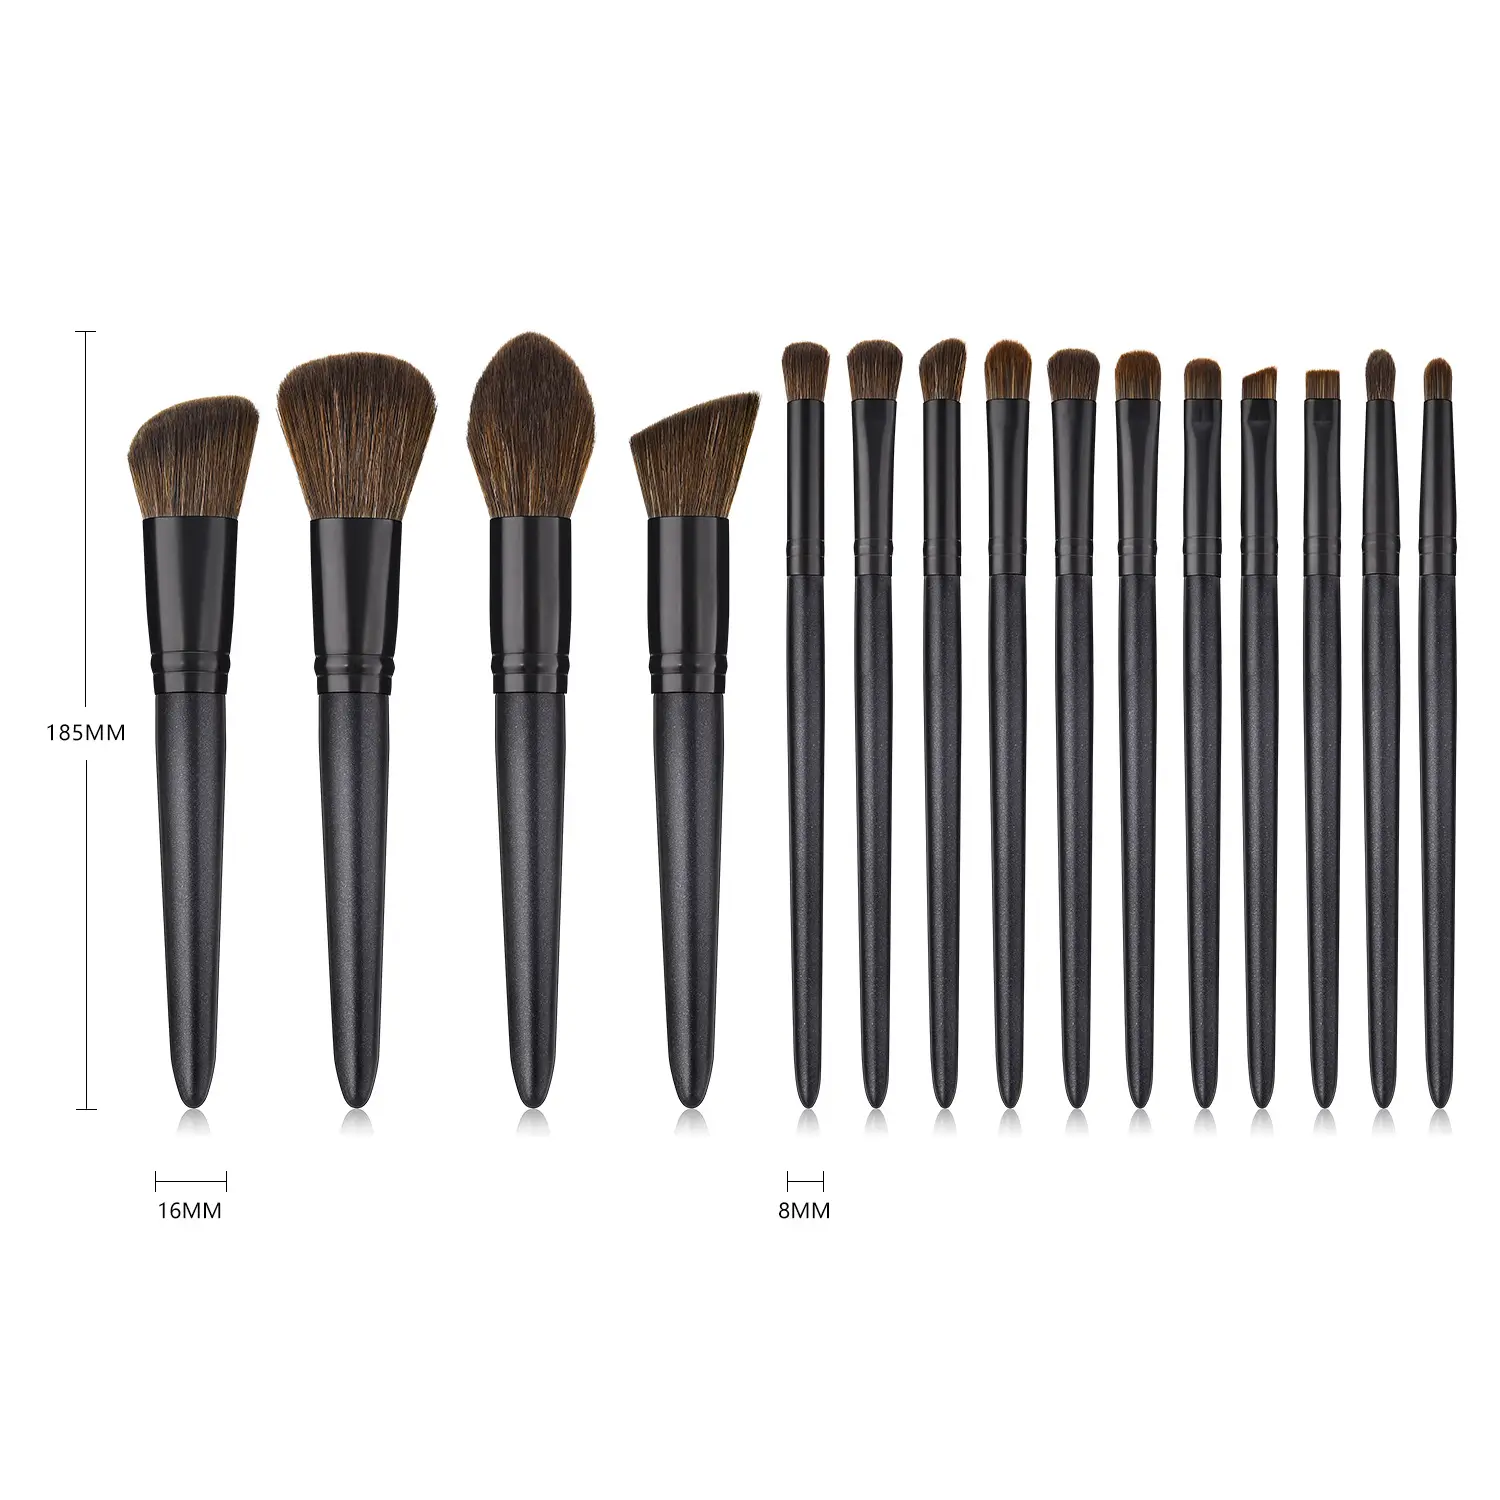 BUEART 15 pcs Per Set 2020 New Arrival top quality Beauty Natural soft hair Private Label Makeup Cosmetic Brushes